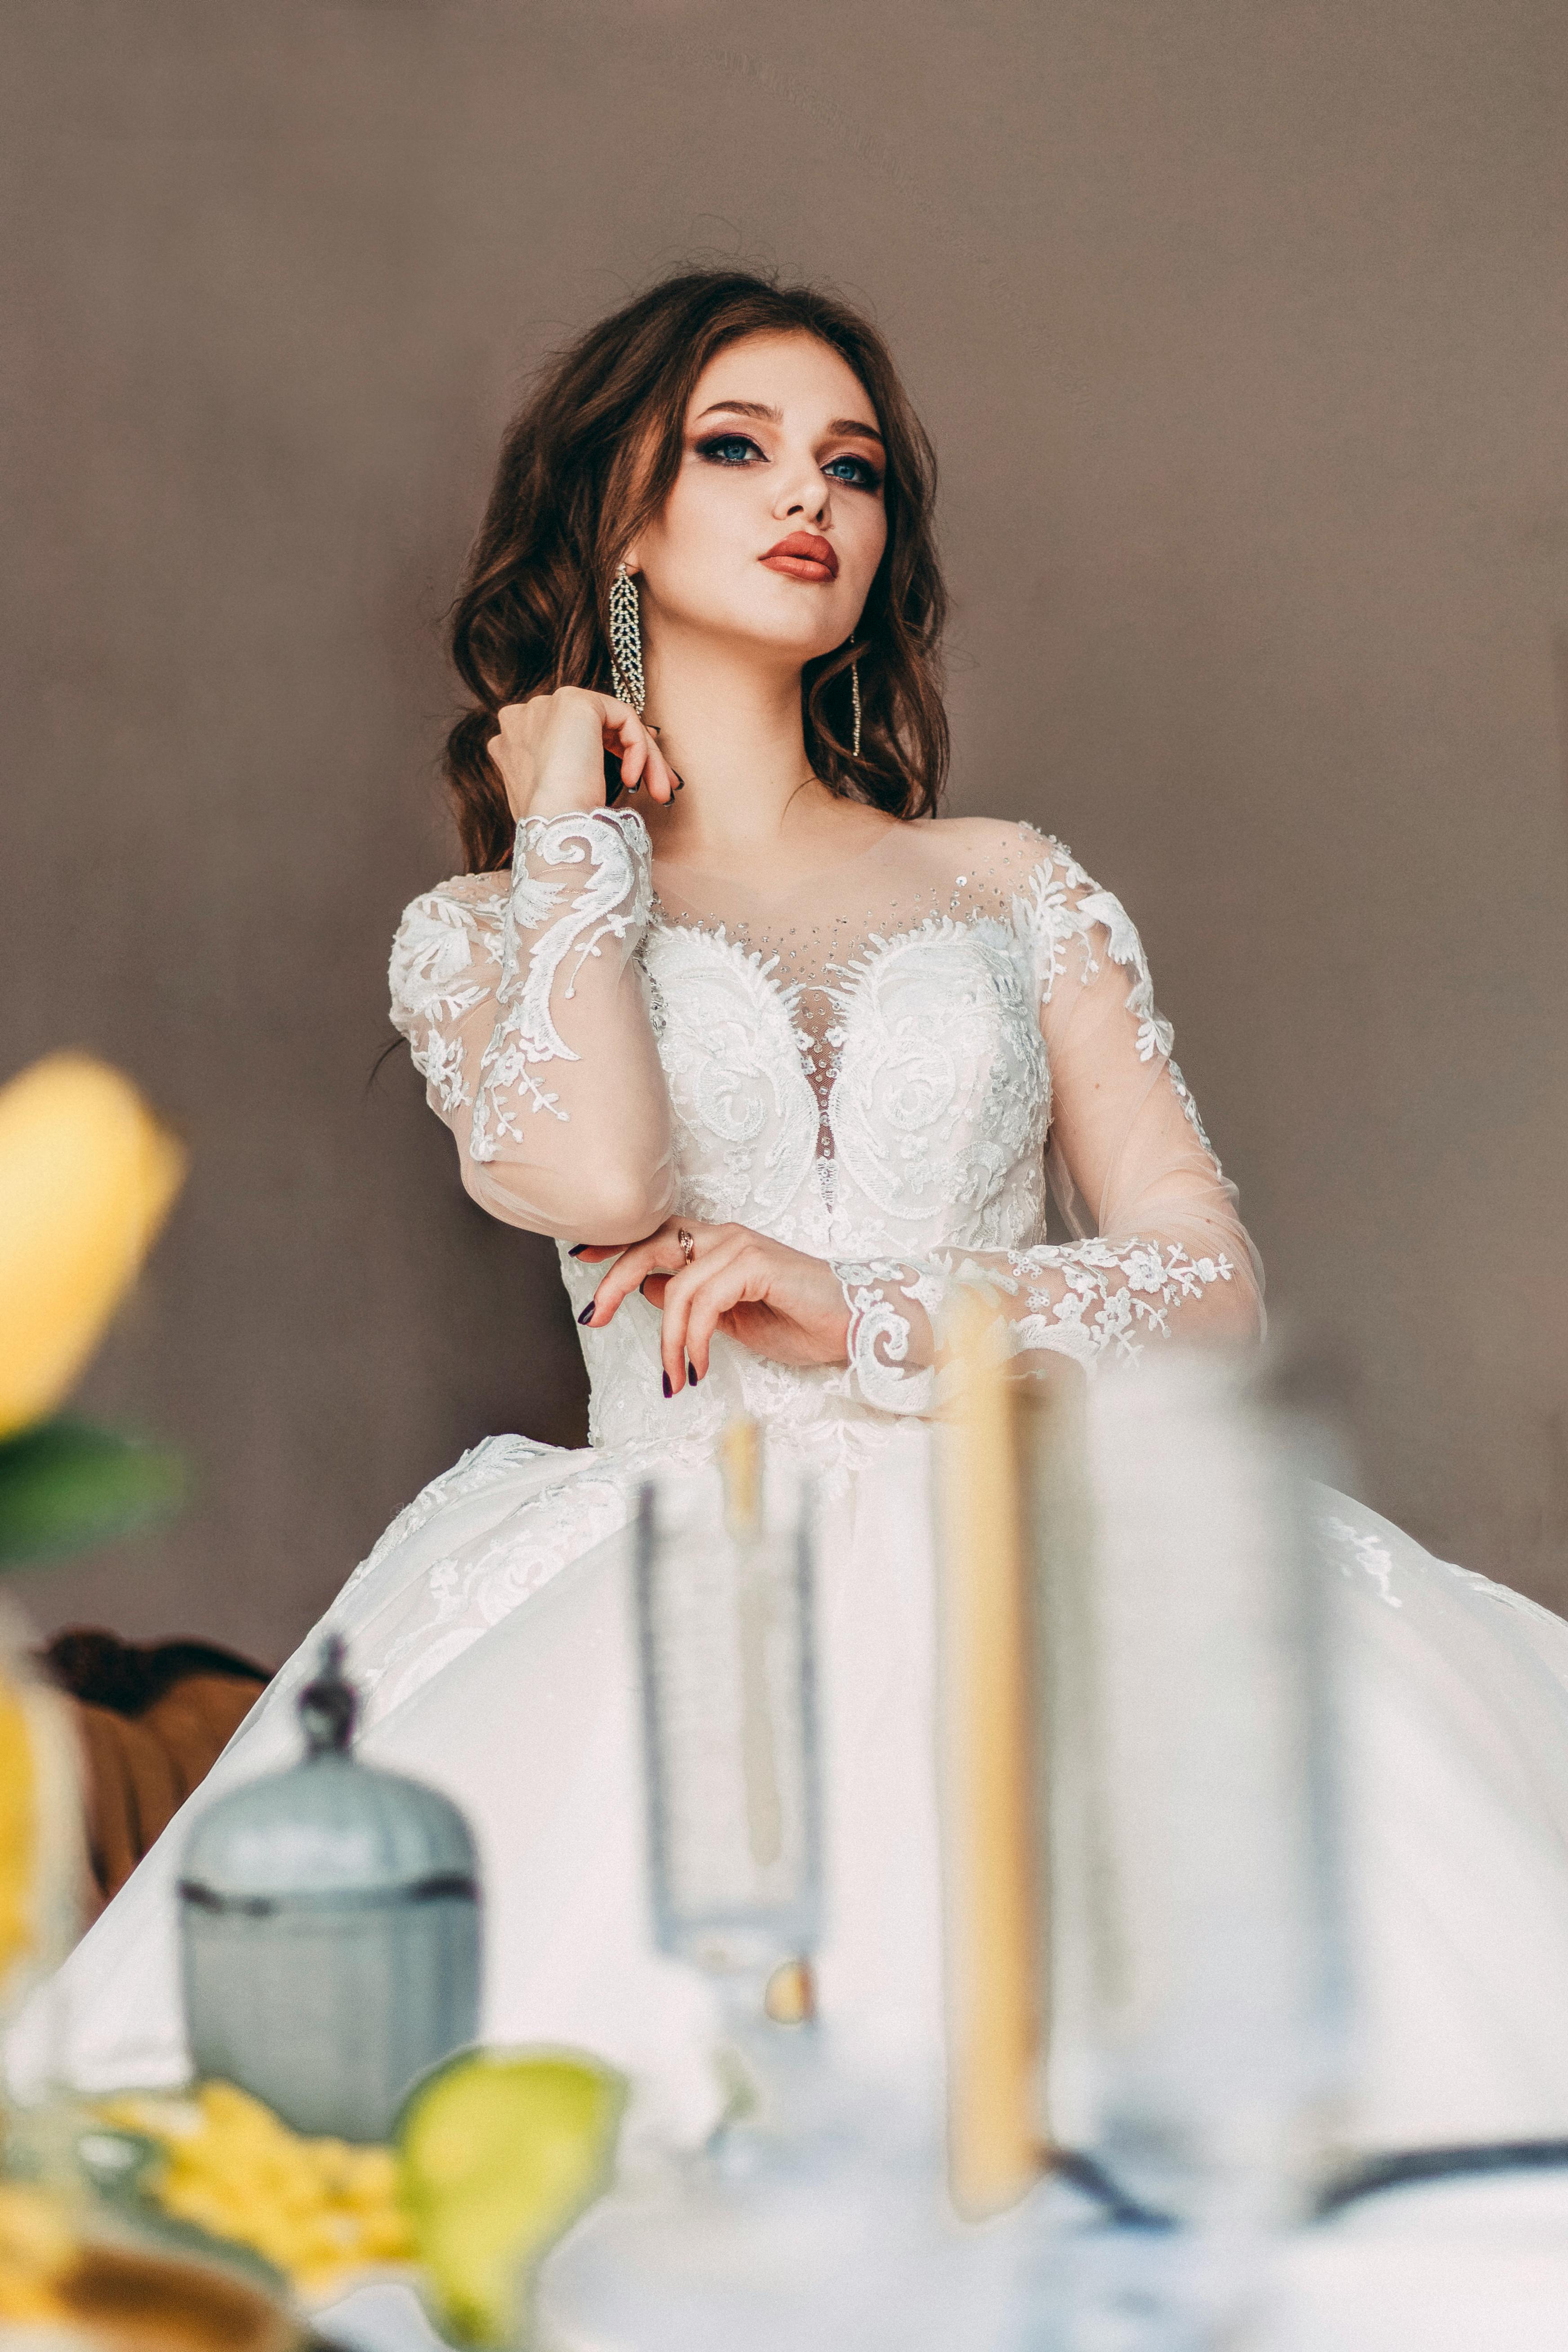 Makeup Ideas with White Dress